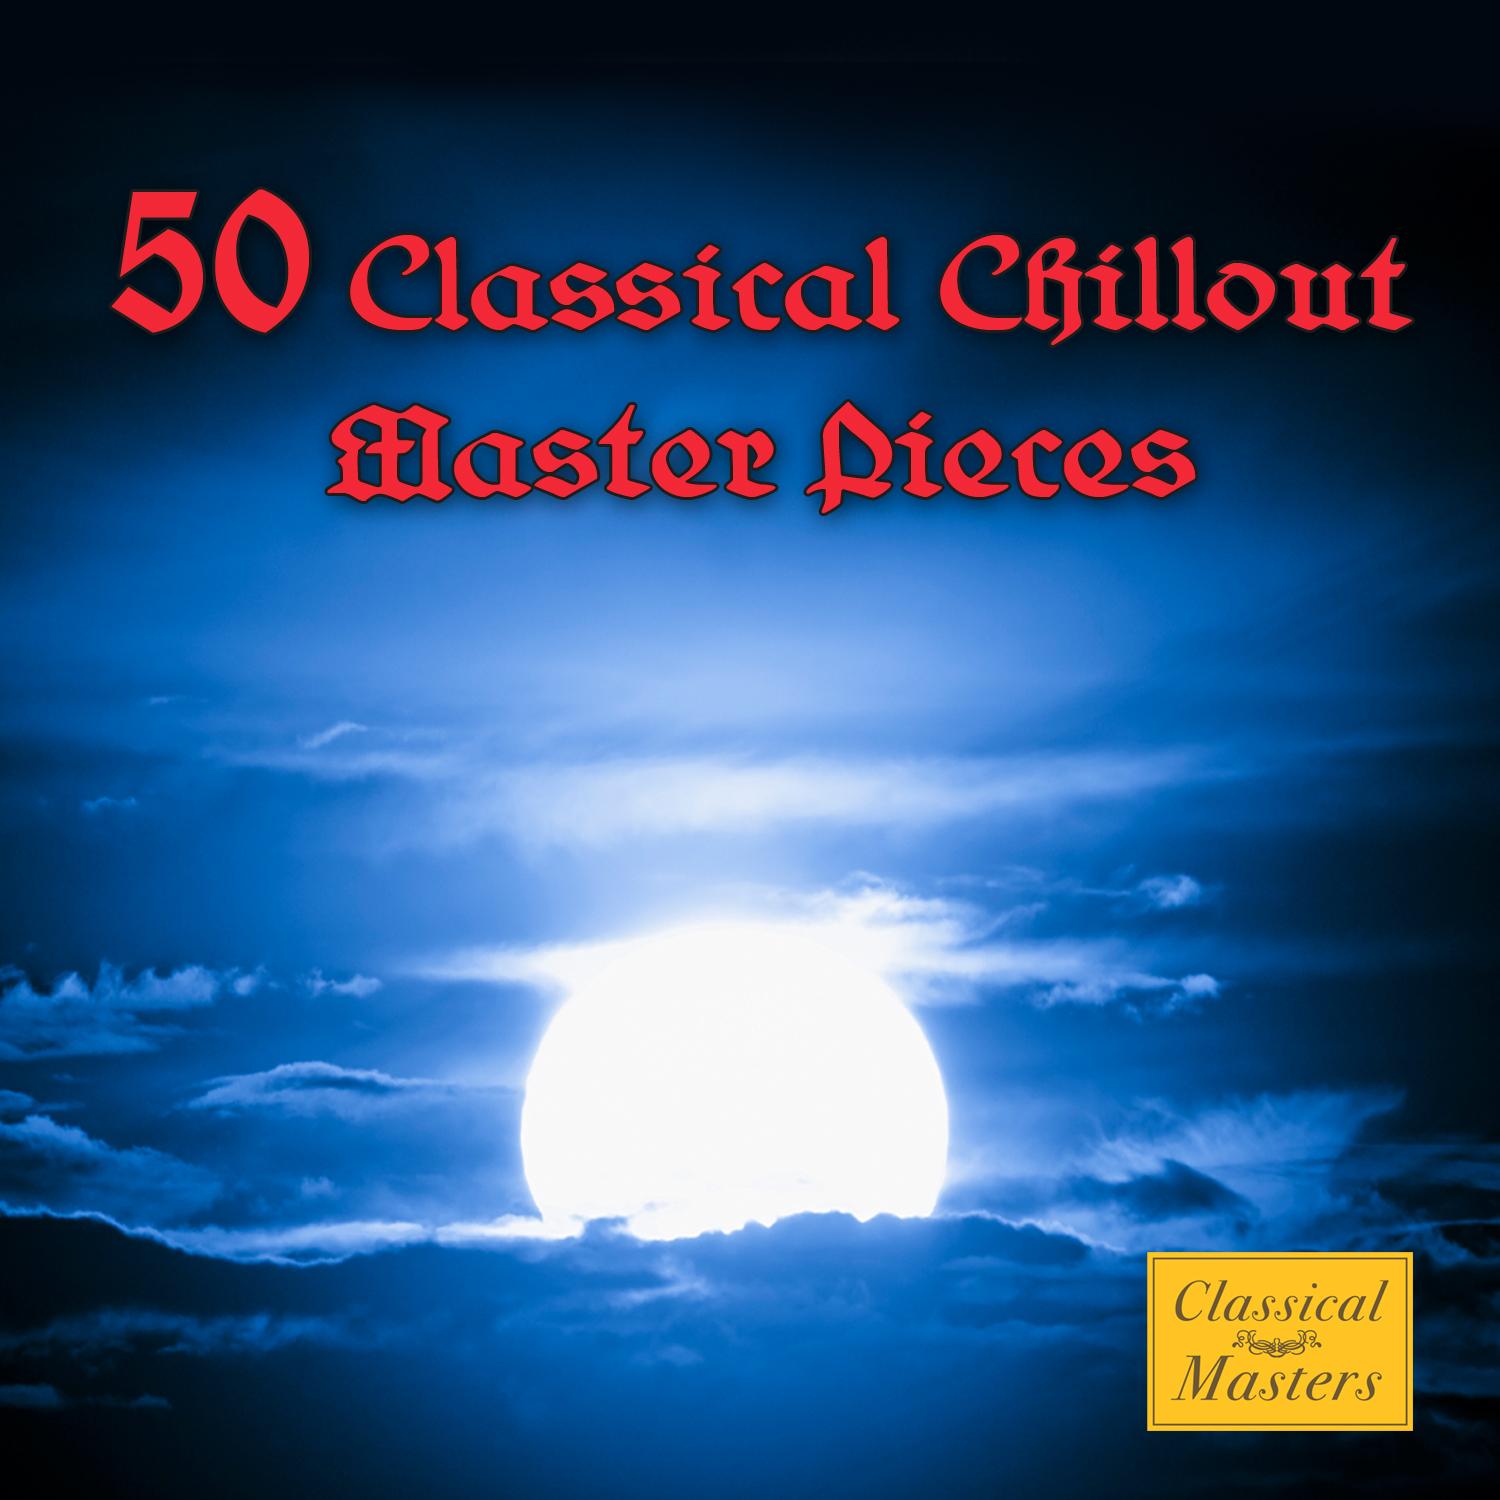 50 Classical Chillout Masterpieces